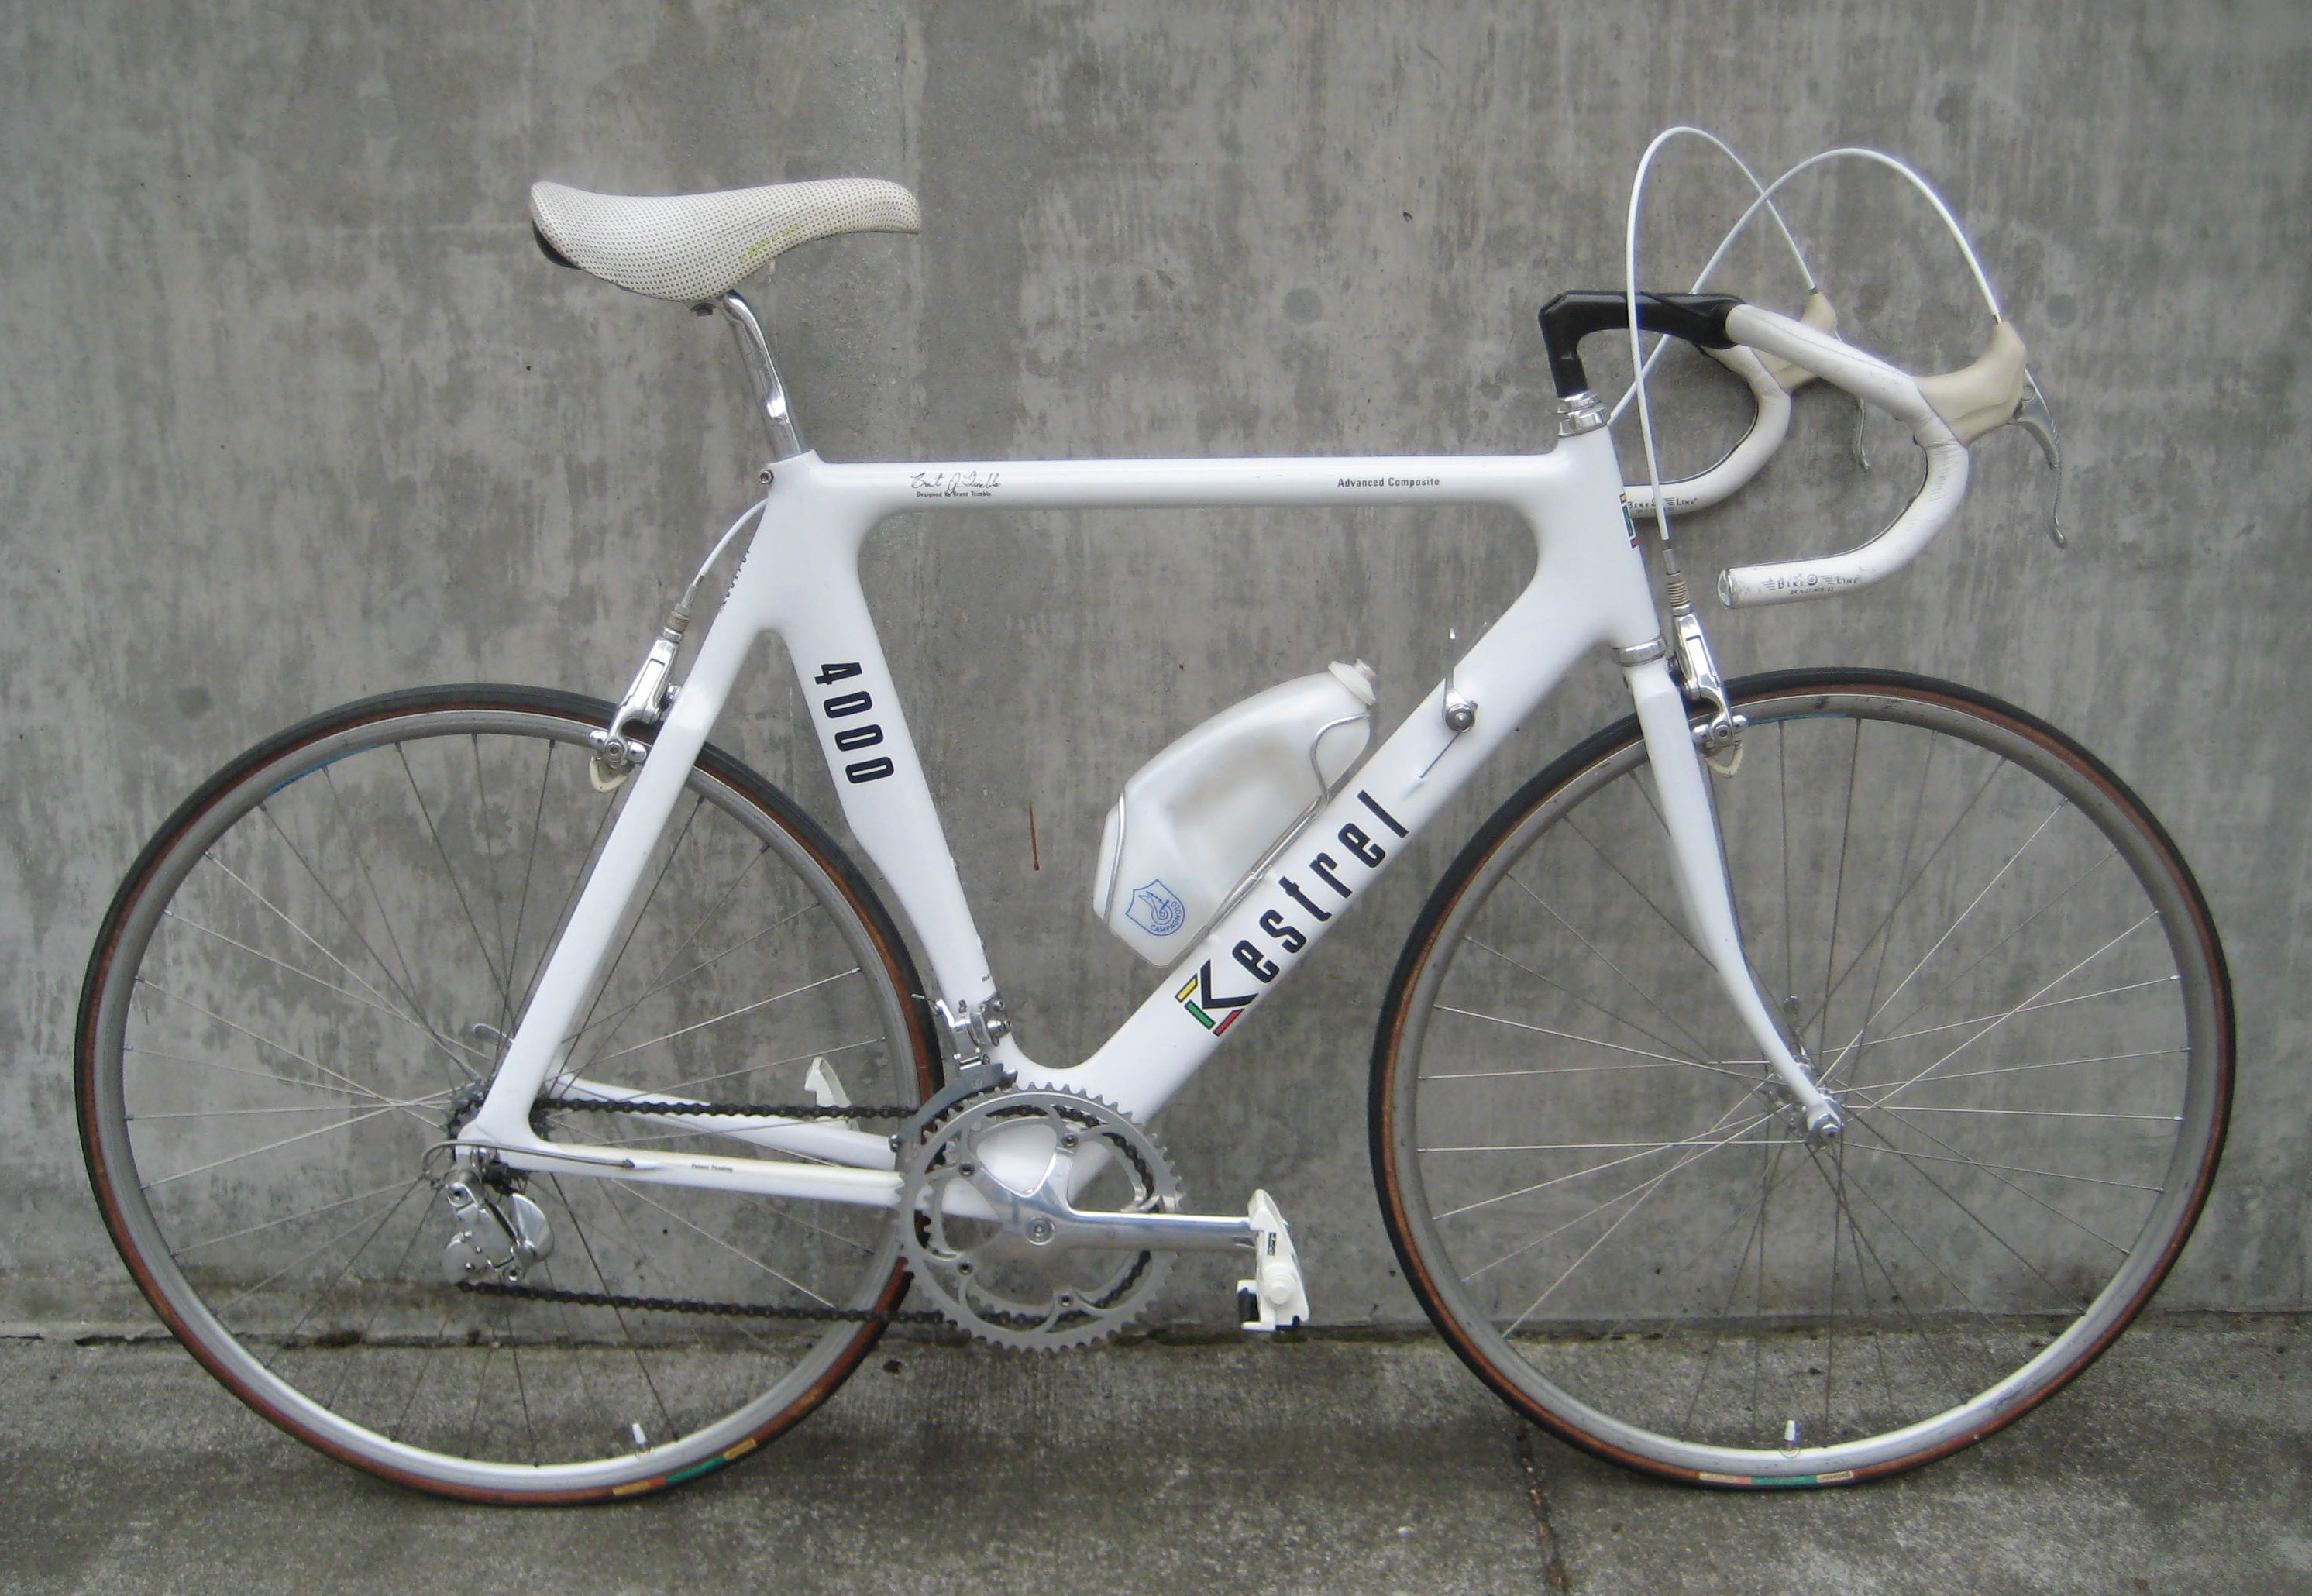 1987 Kestrel 4000 road bike with Campy C Record | Classic Cycle ...